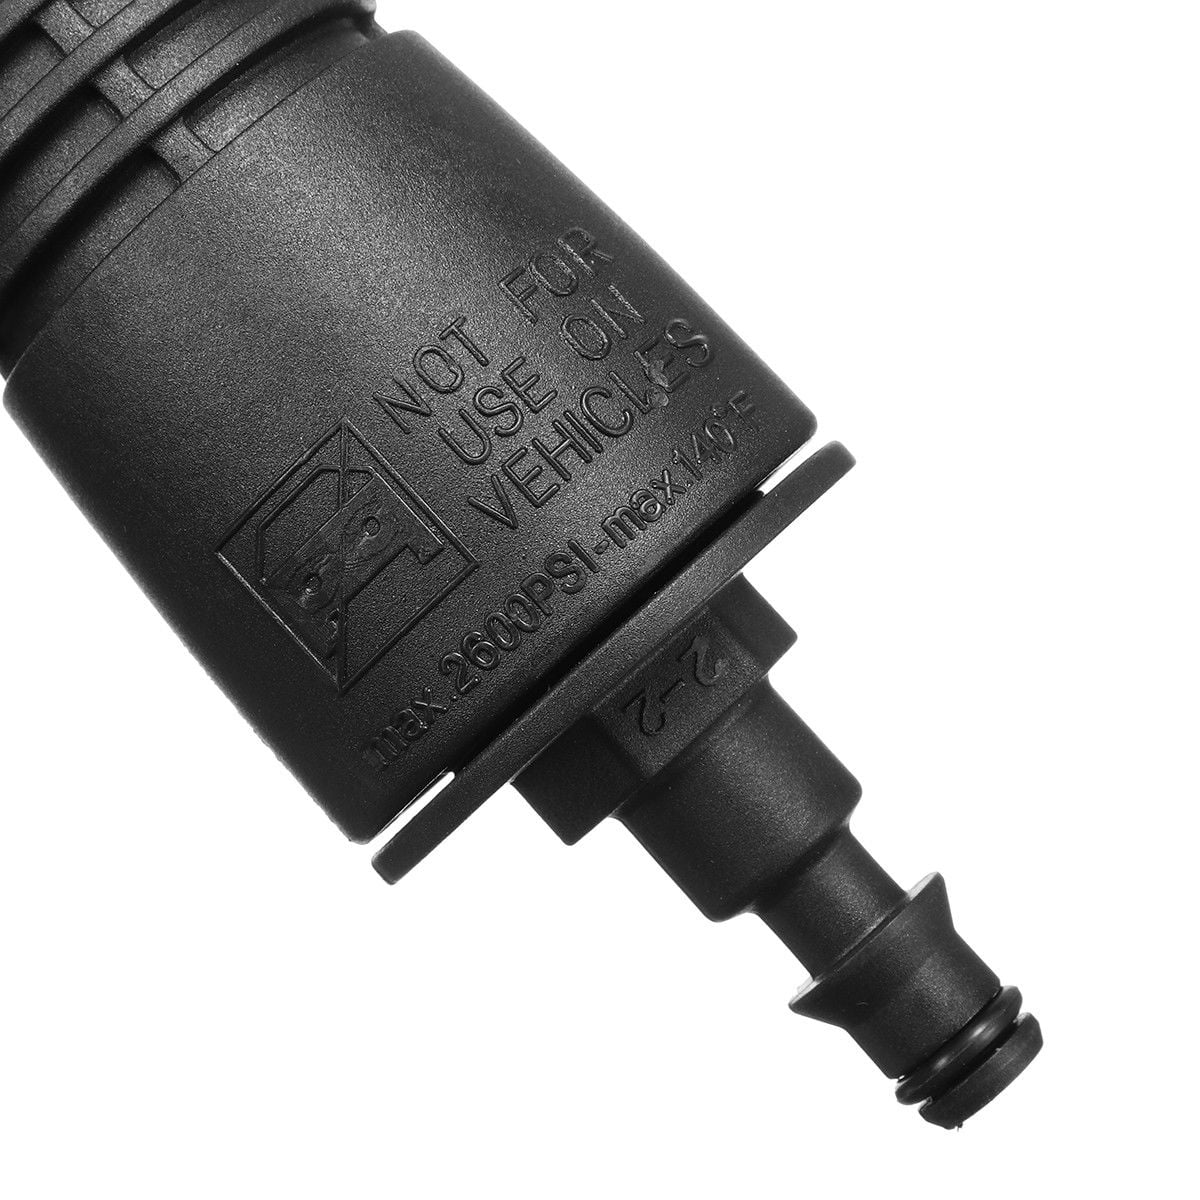 Details about   Rotary Turbo Nozzle Dirtblaster for Lavor Lavorwash Pressure Washer 2200 PSI 